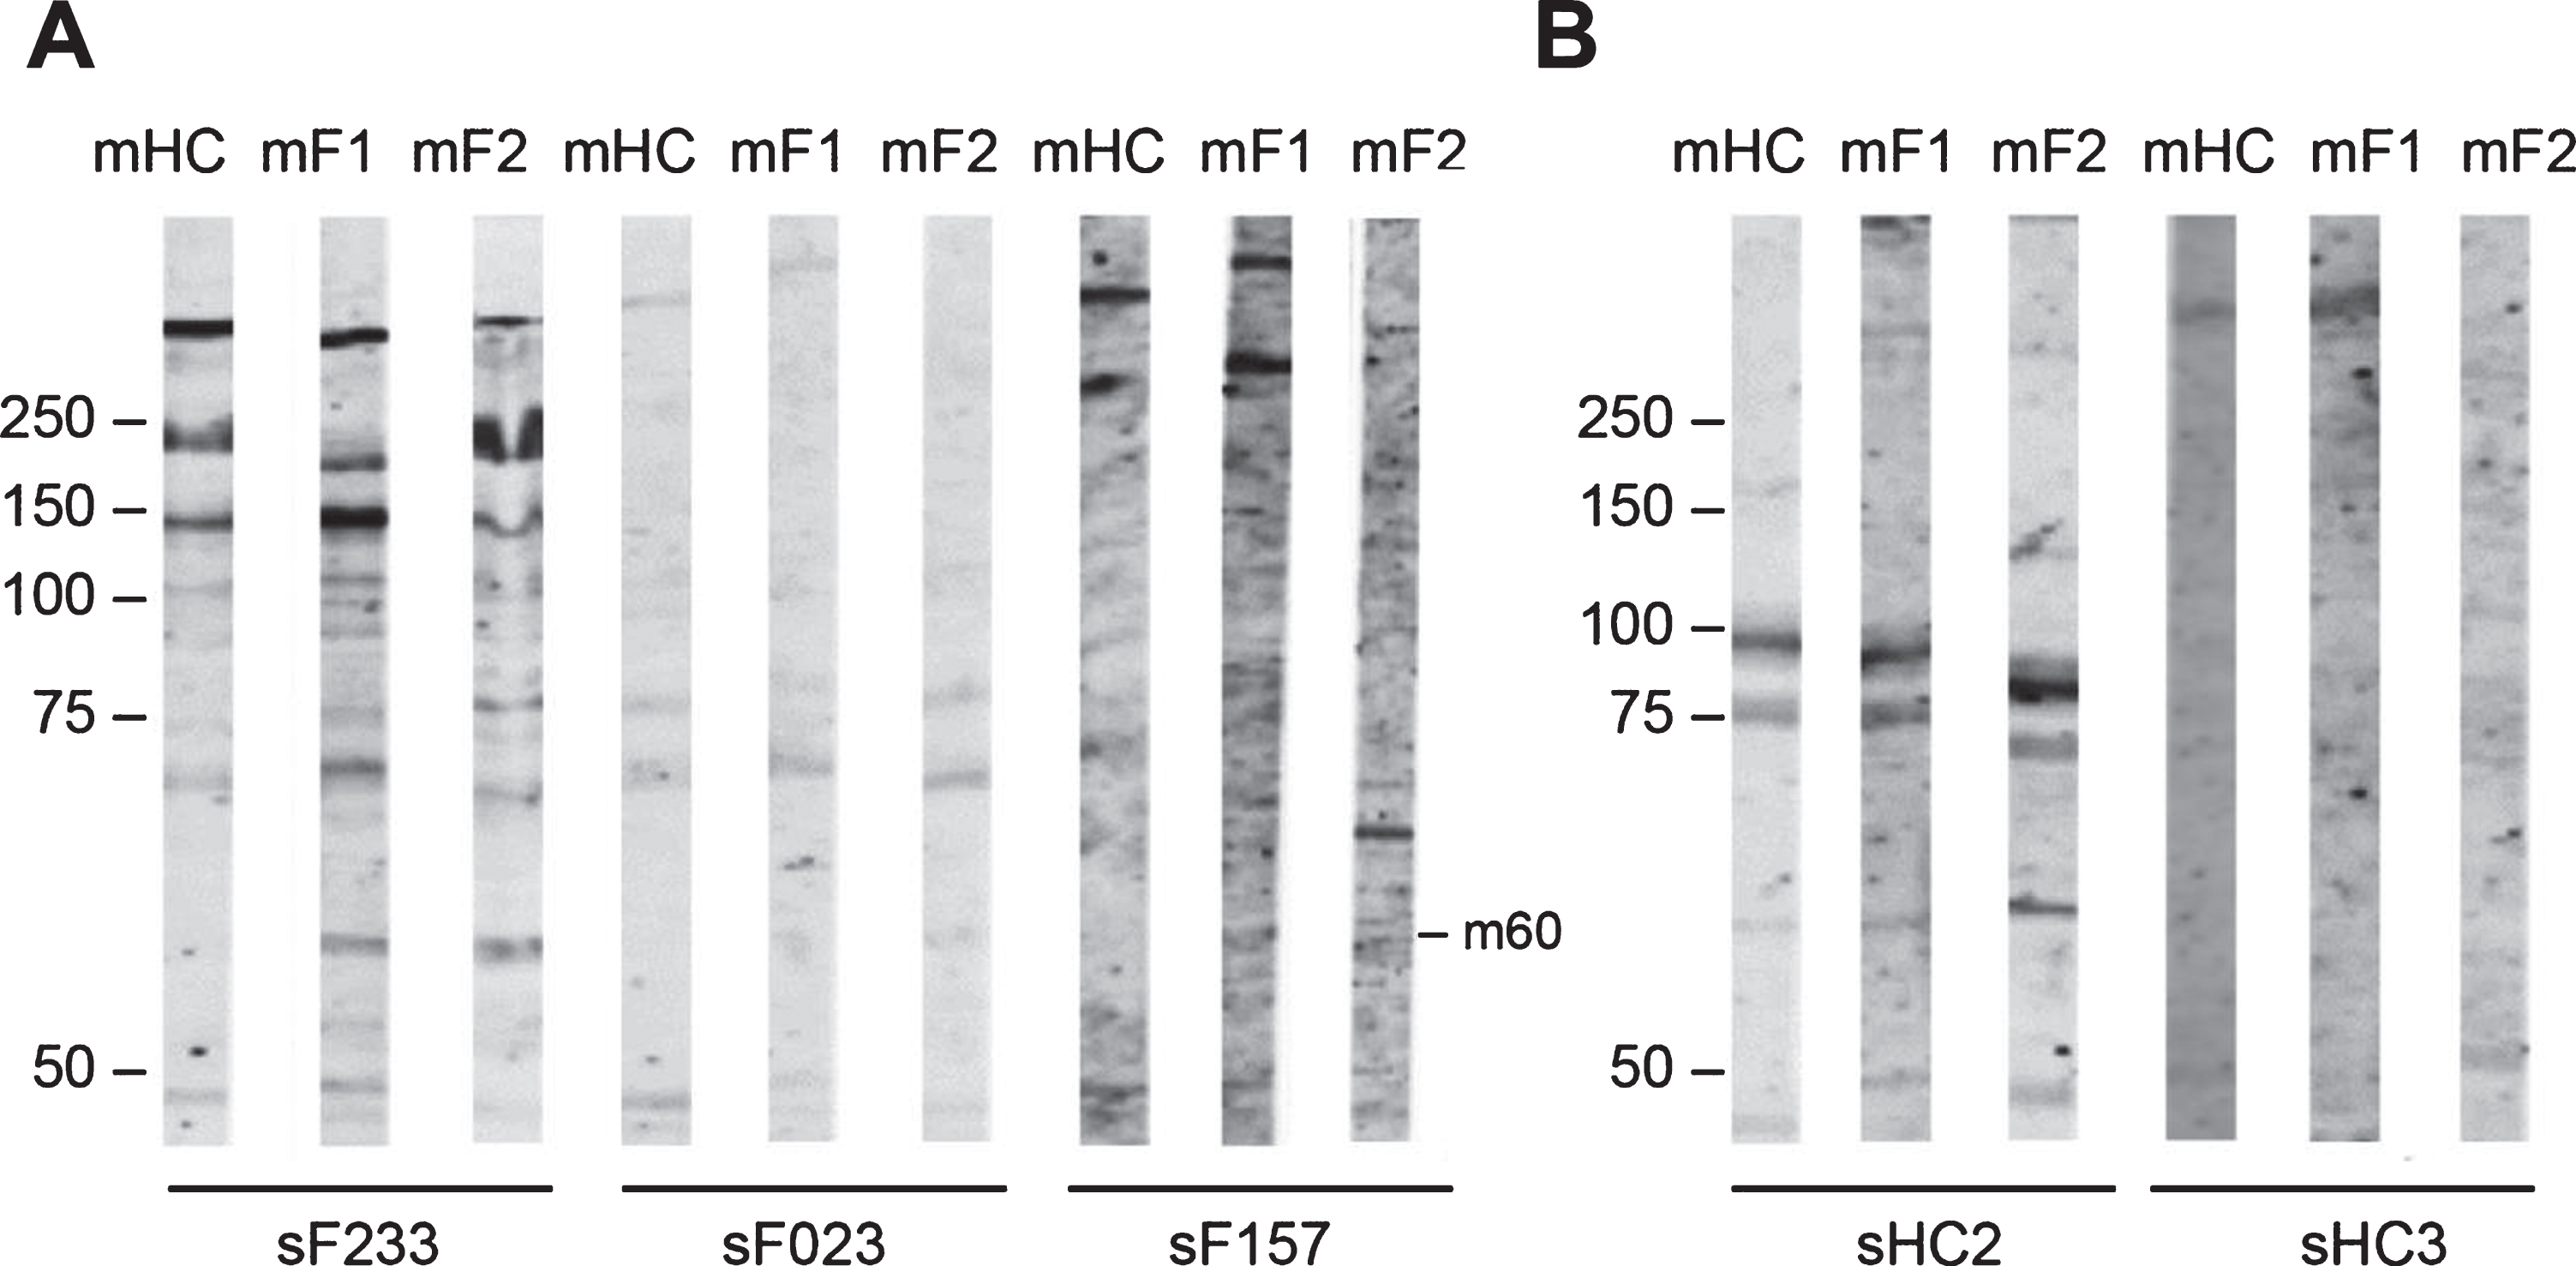 Reactivity of FSHD patient sera and HC sera with FSHD myotubes protein extract. FSHD1 myotubes protein extract (mF1), FSHD2 myotubes protein extract (mF2), and healthy myotubes protein extract (mHC) were separated by SDS-PAGE and transferred to nitrocellulose membranes. Blot strips were incubated with 49 FSHD patient sera (sF) (A) and with 3 healthy control sera (sHC) (B). Panels contain a representative set of tested samples. On the left of each panel the positions of molecular weight markers are indicated.